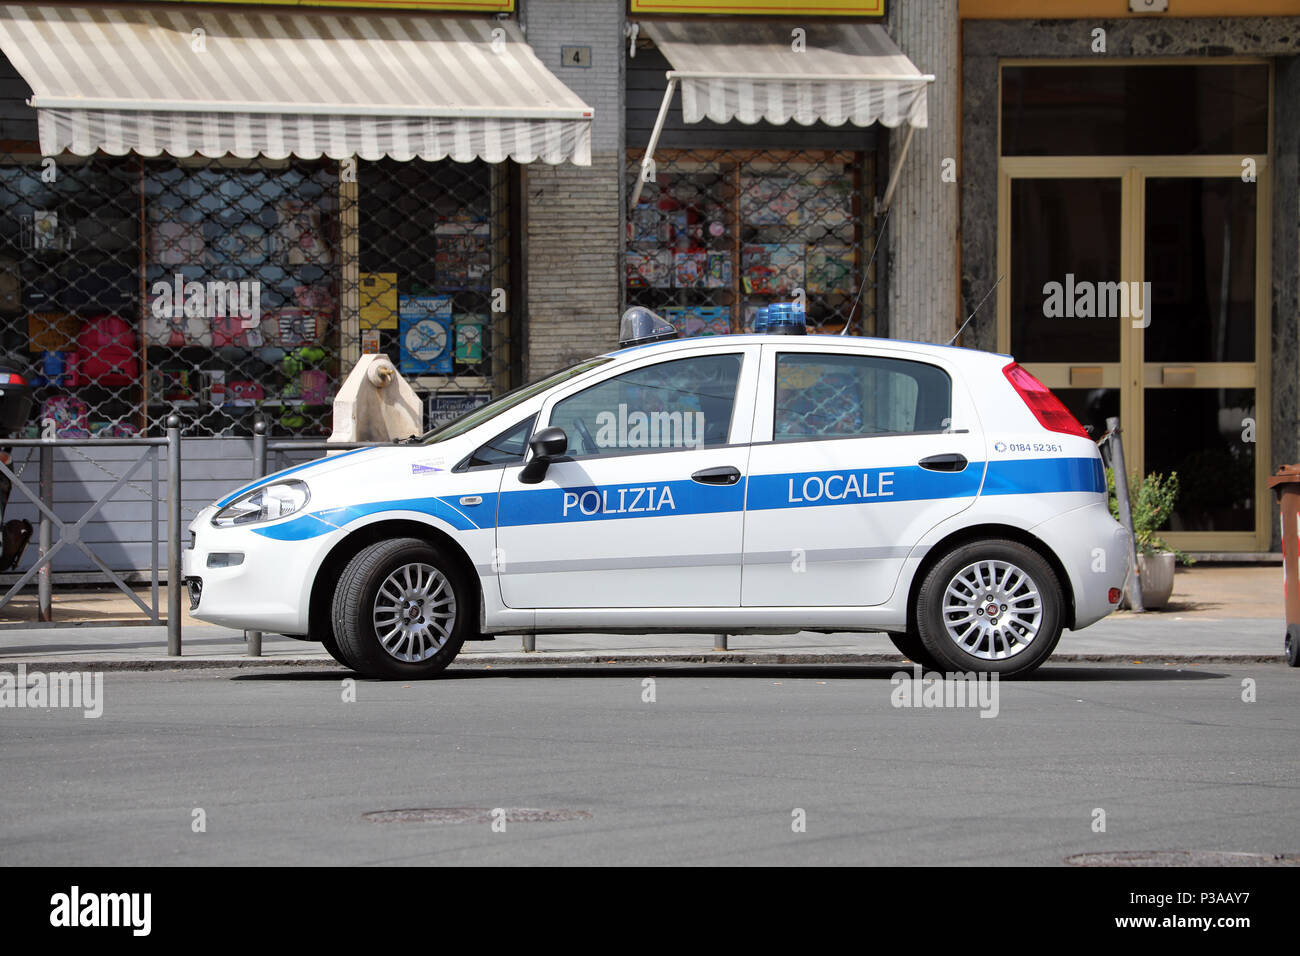 San Remo, Italy - June 10, 2018: Fiat Punto III Hatchback Italian Police Car (Polizia Locale) Parked In The City Center of San Remo, Liguria, Italy Stock Photo